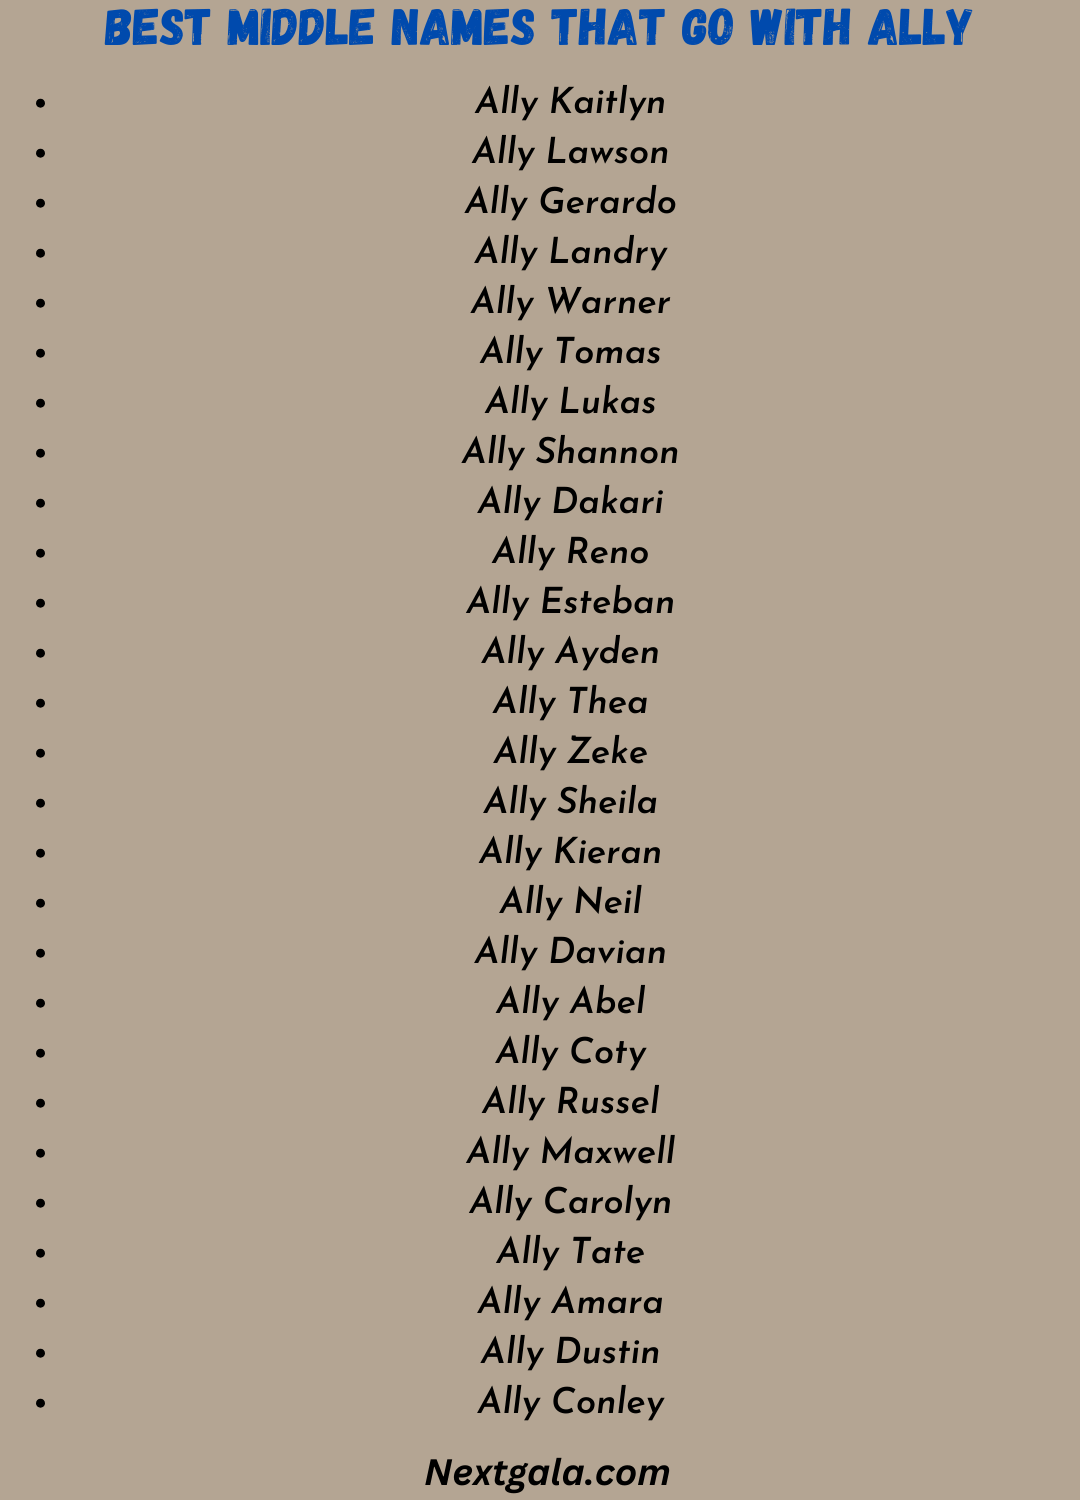 Best Middle Names That Go With Ally